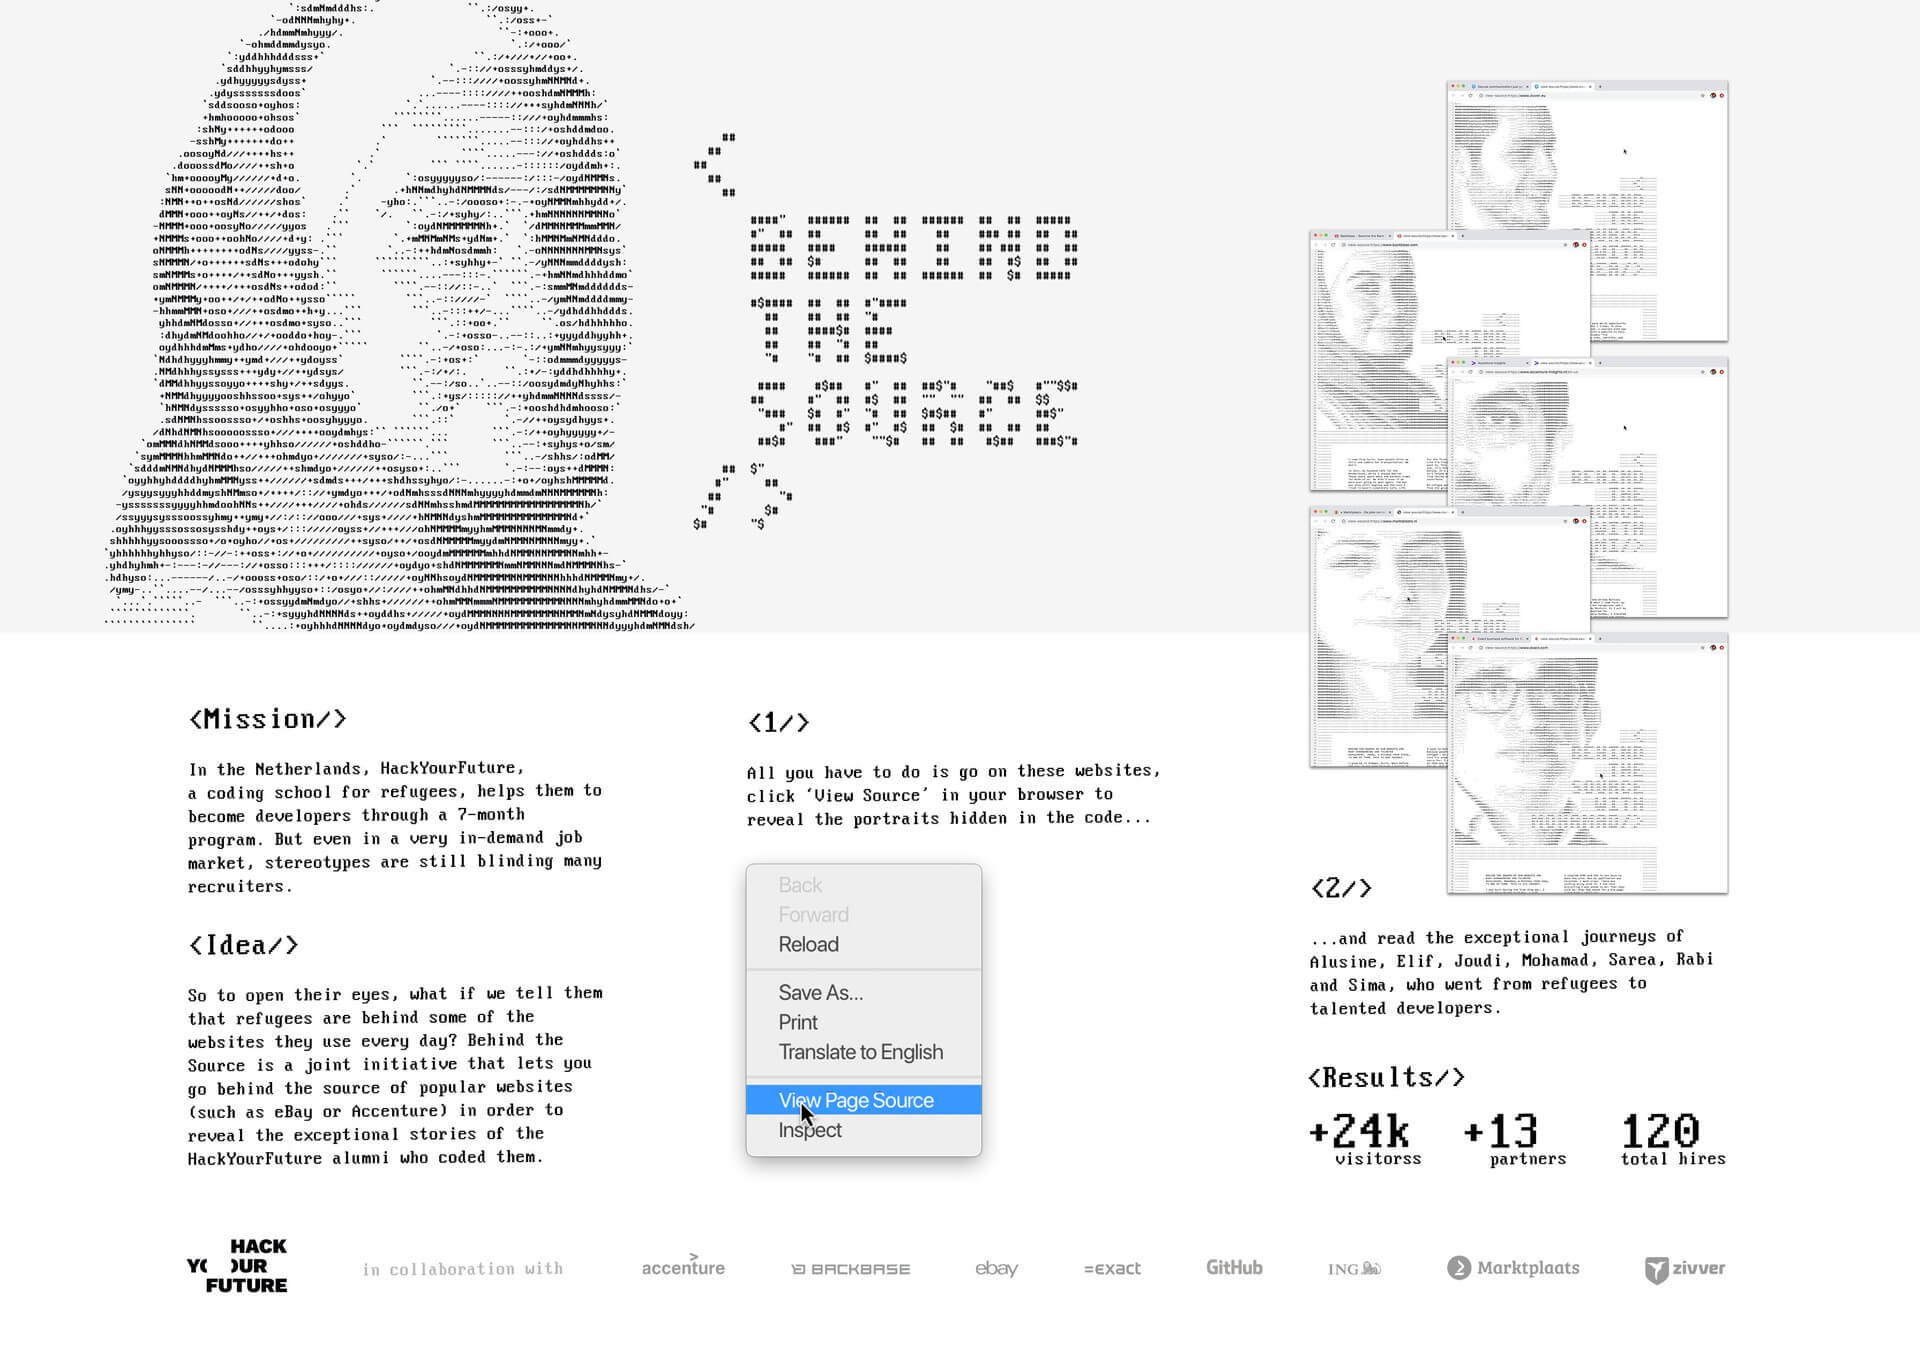 Behind the source by Hack Your Future